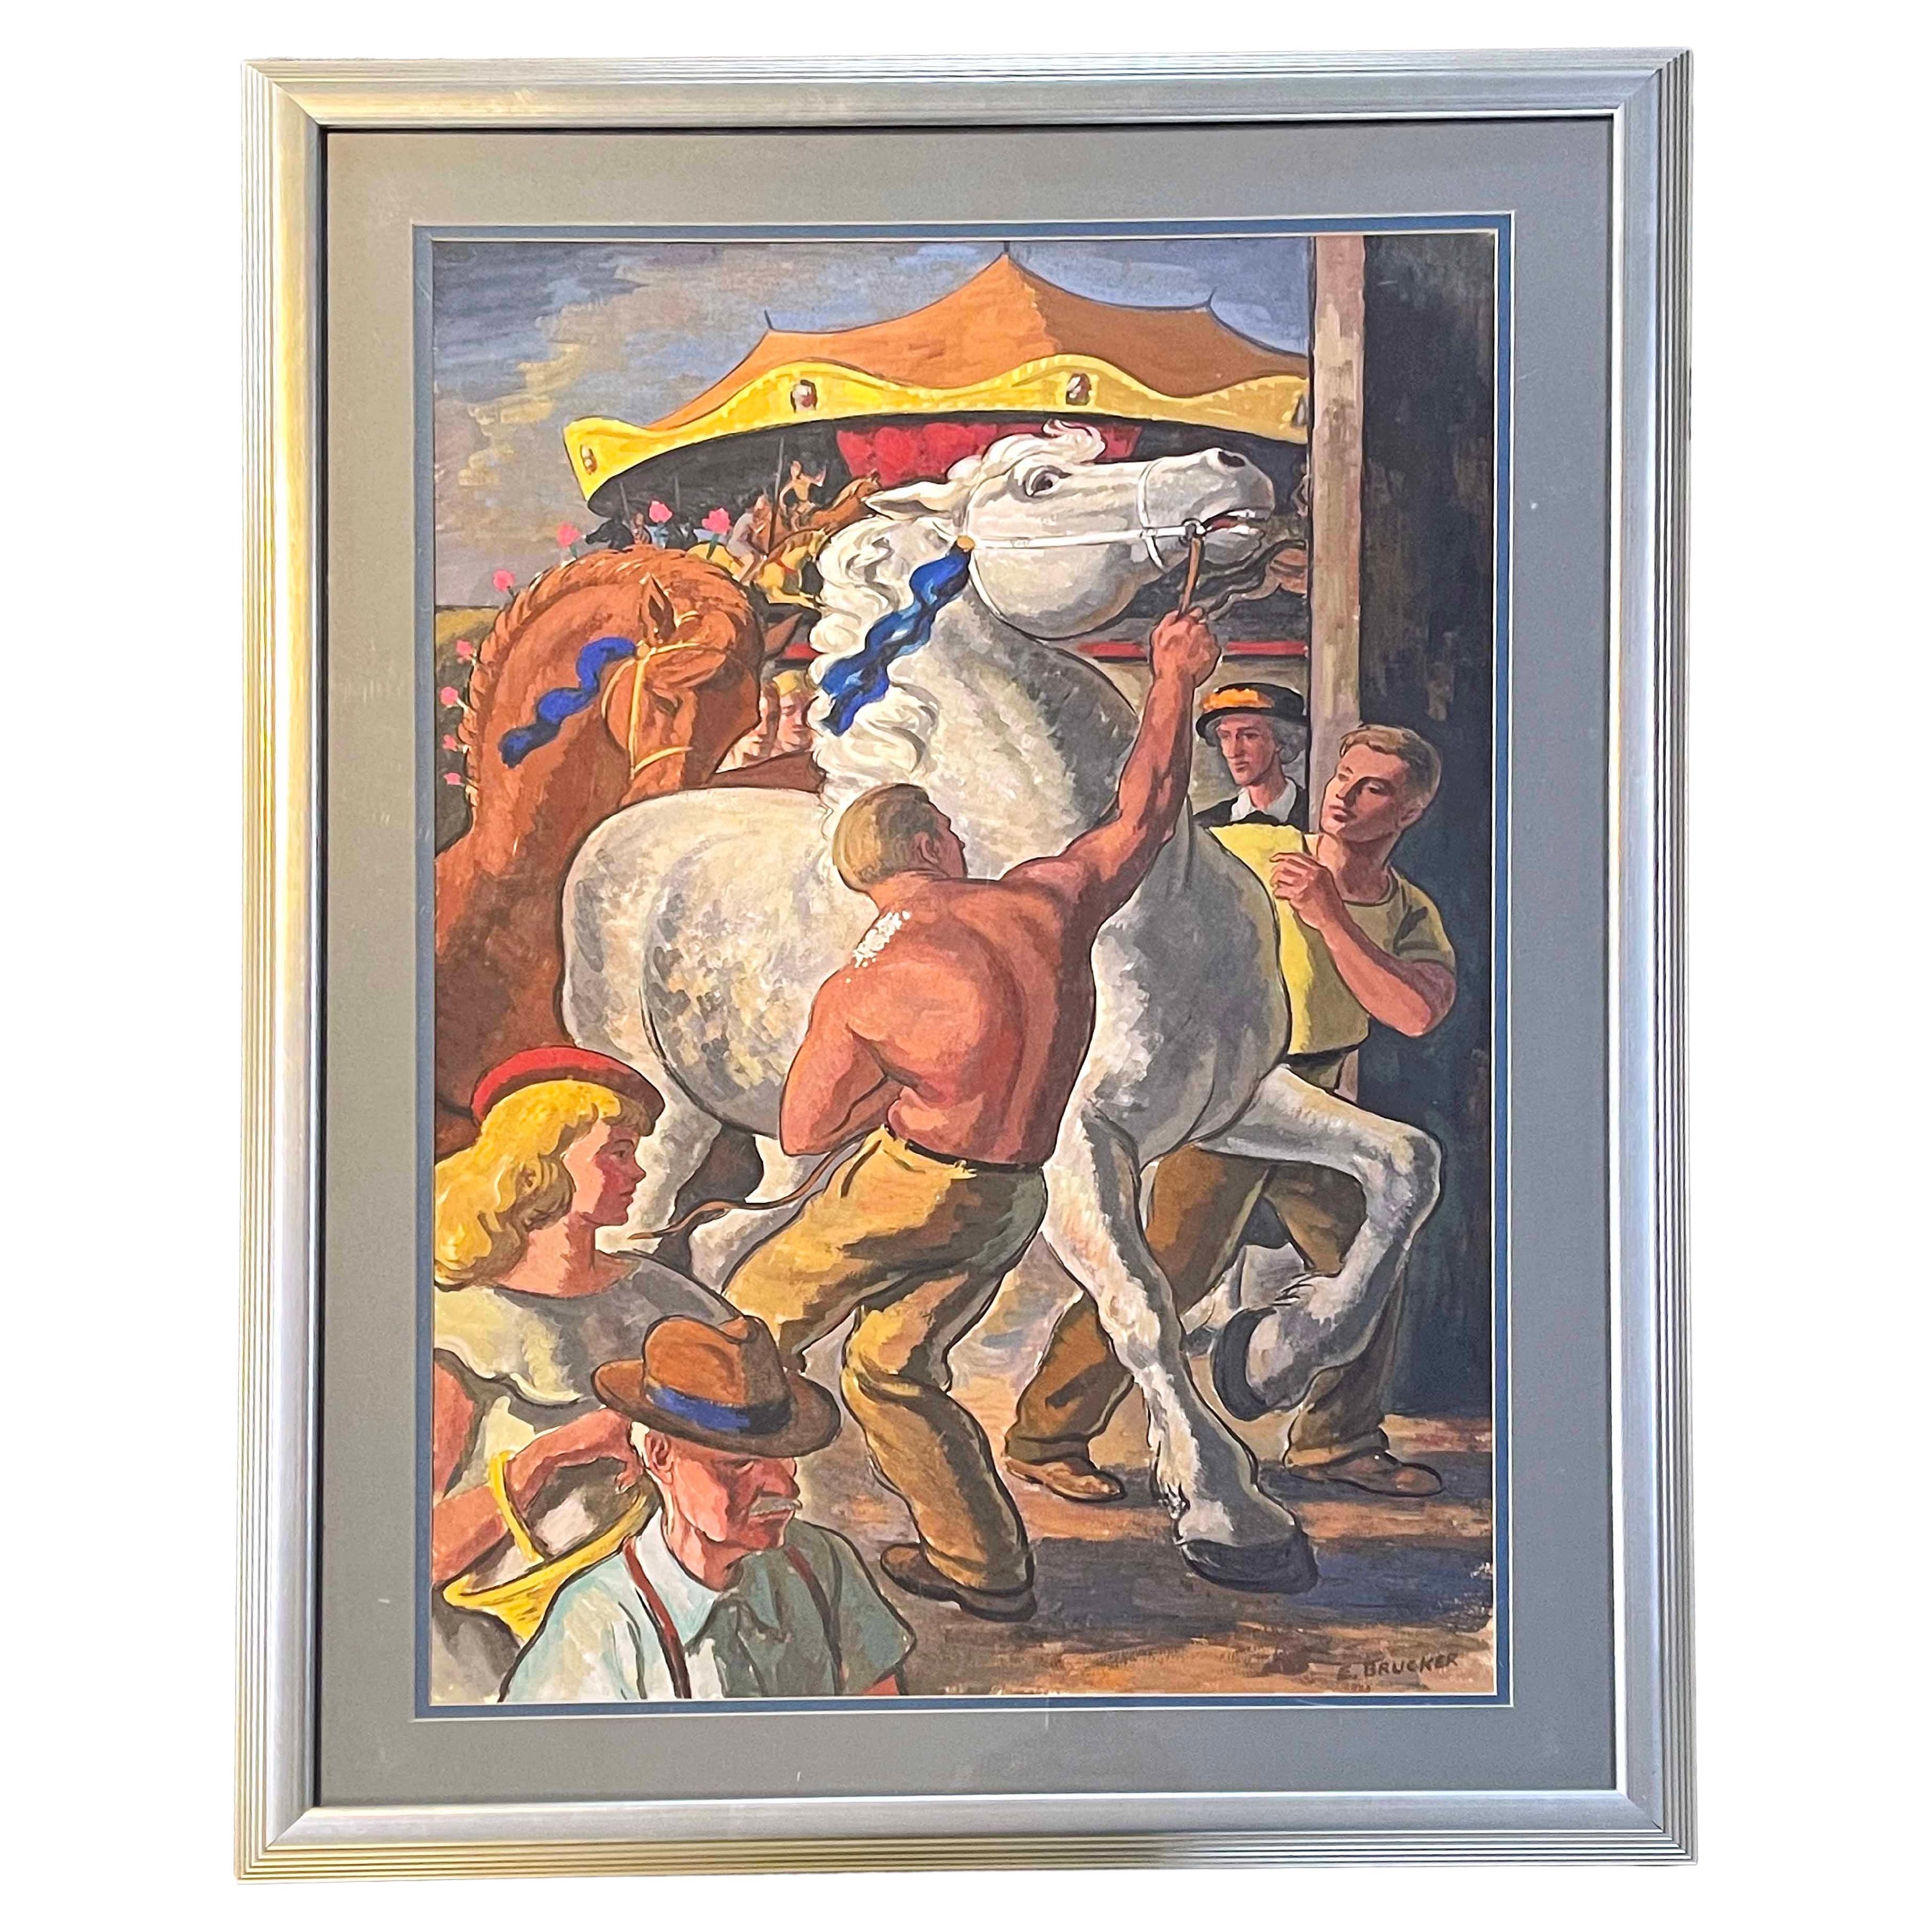 Large and dynamic, this 1947-vintage painting depicts a shirtless man handling a high-spirited Percheron horse that won a blue ribbon at the Indiana state fair.   The young men watching the scene, the fairgoers walking by, and the merry-go-round in